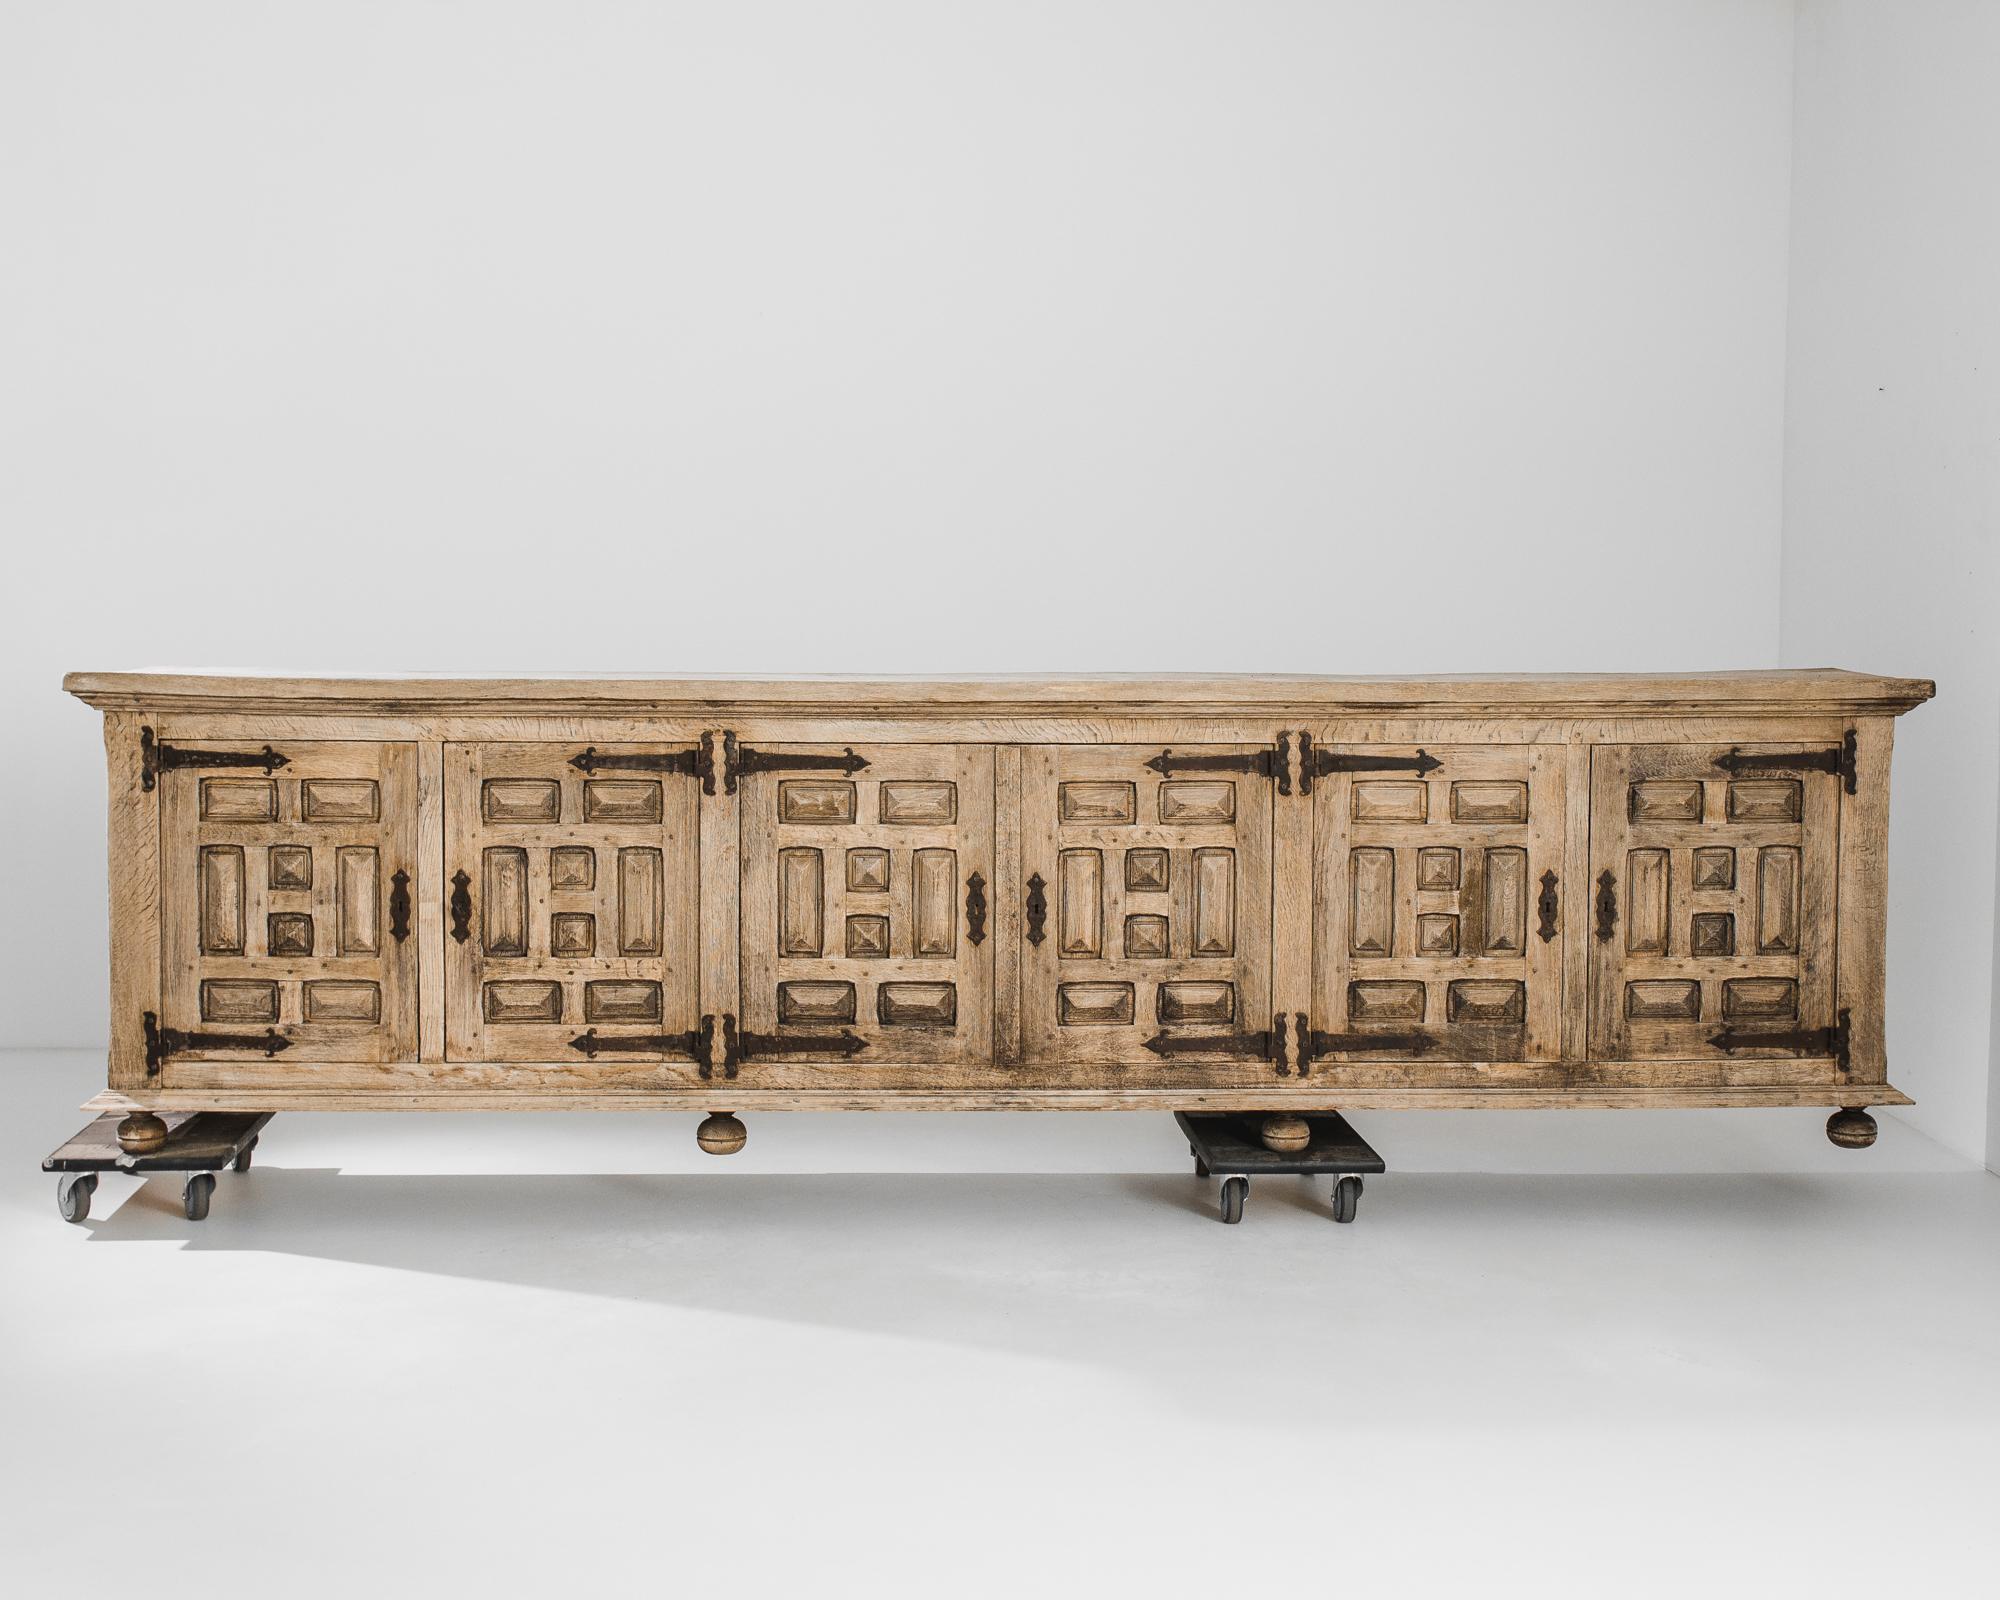 An electric mix of styles give this oak buffet a unique appeal. Made in Belgium in the 1960s, the long case is elevated upon ball feet; graphic diamond-point moldings decorate the cupboard doors. Iron door hinges and lock pieces, weathered to an